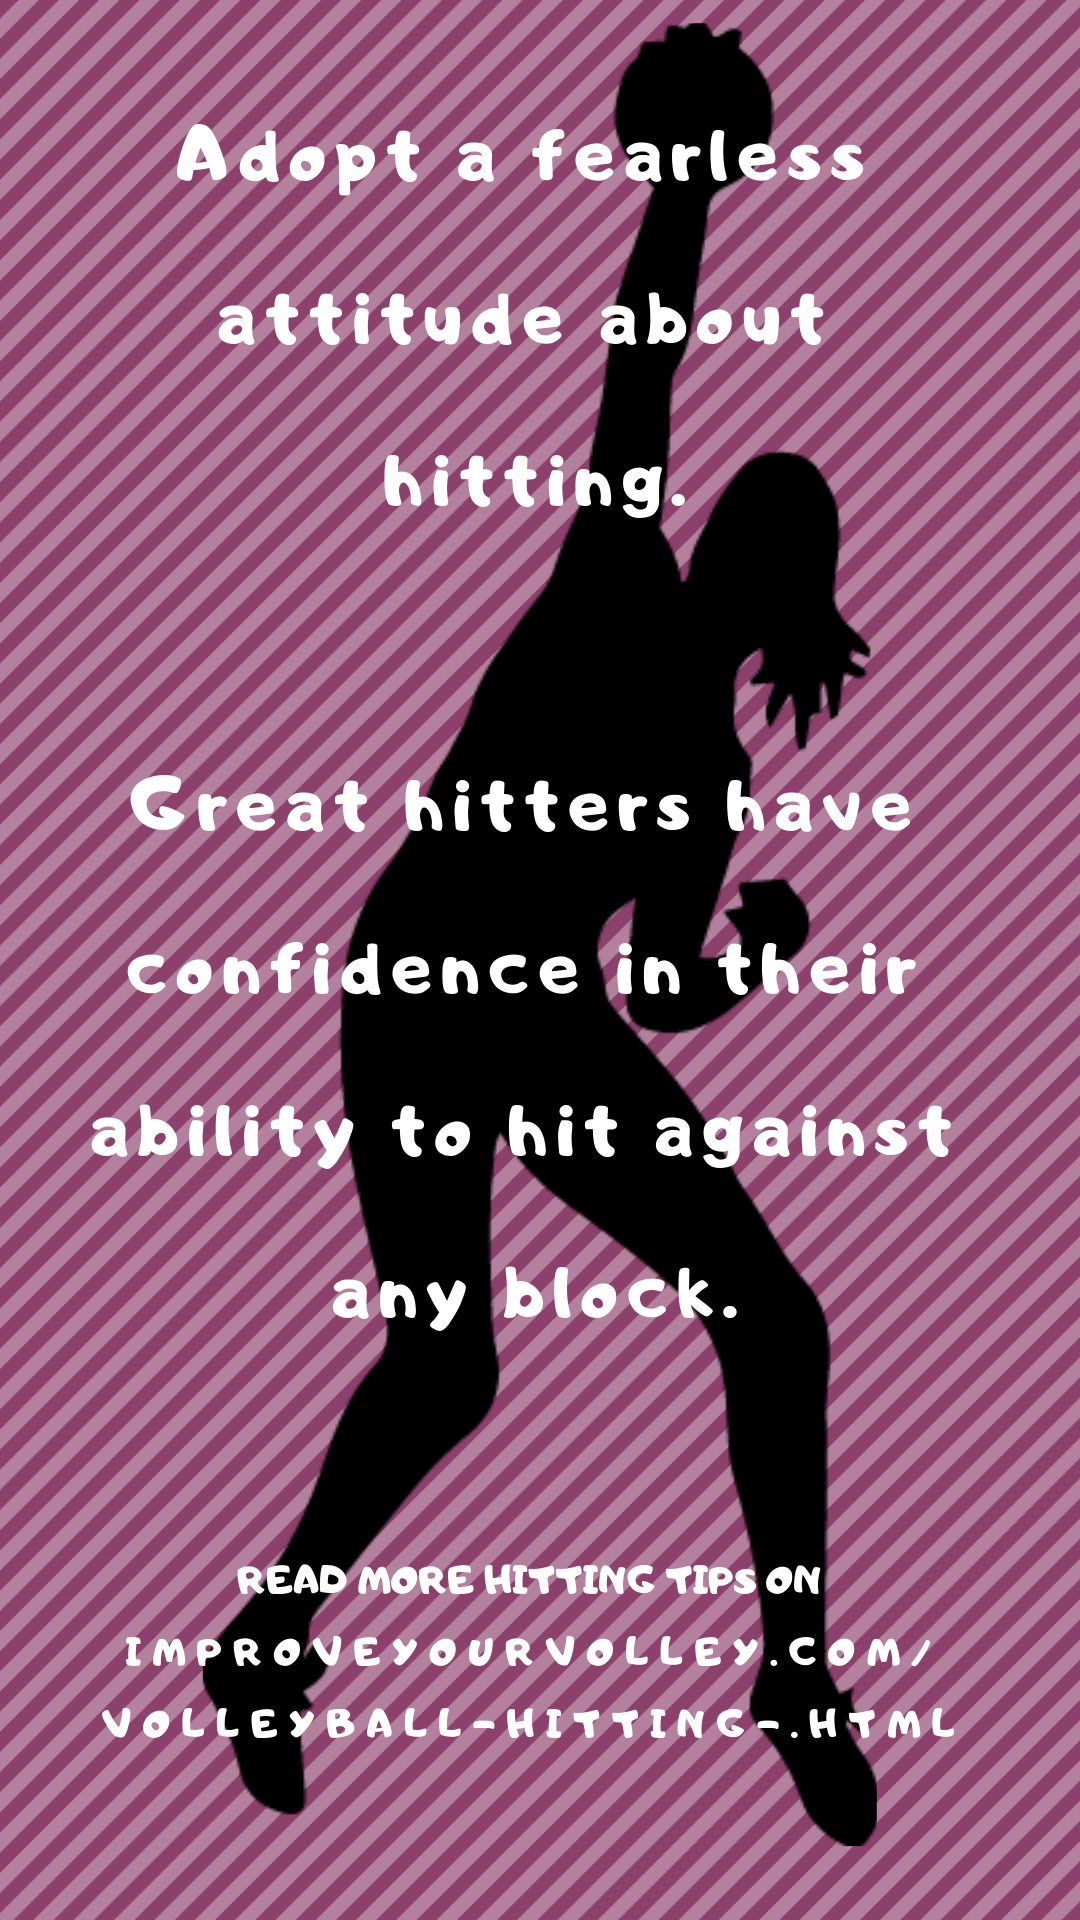 Adopt a fearless attitude about hitting. Great hitters have confidence in their ability to hit against any block.